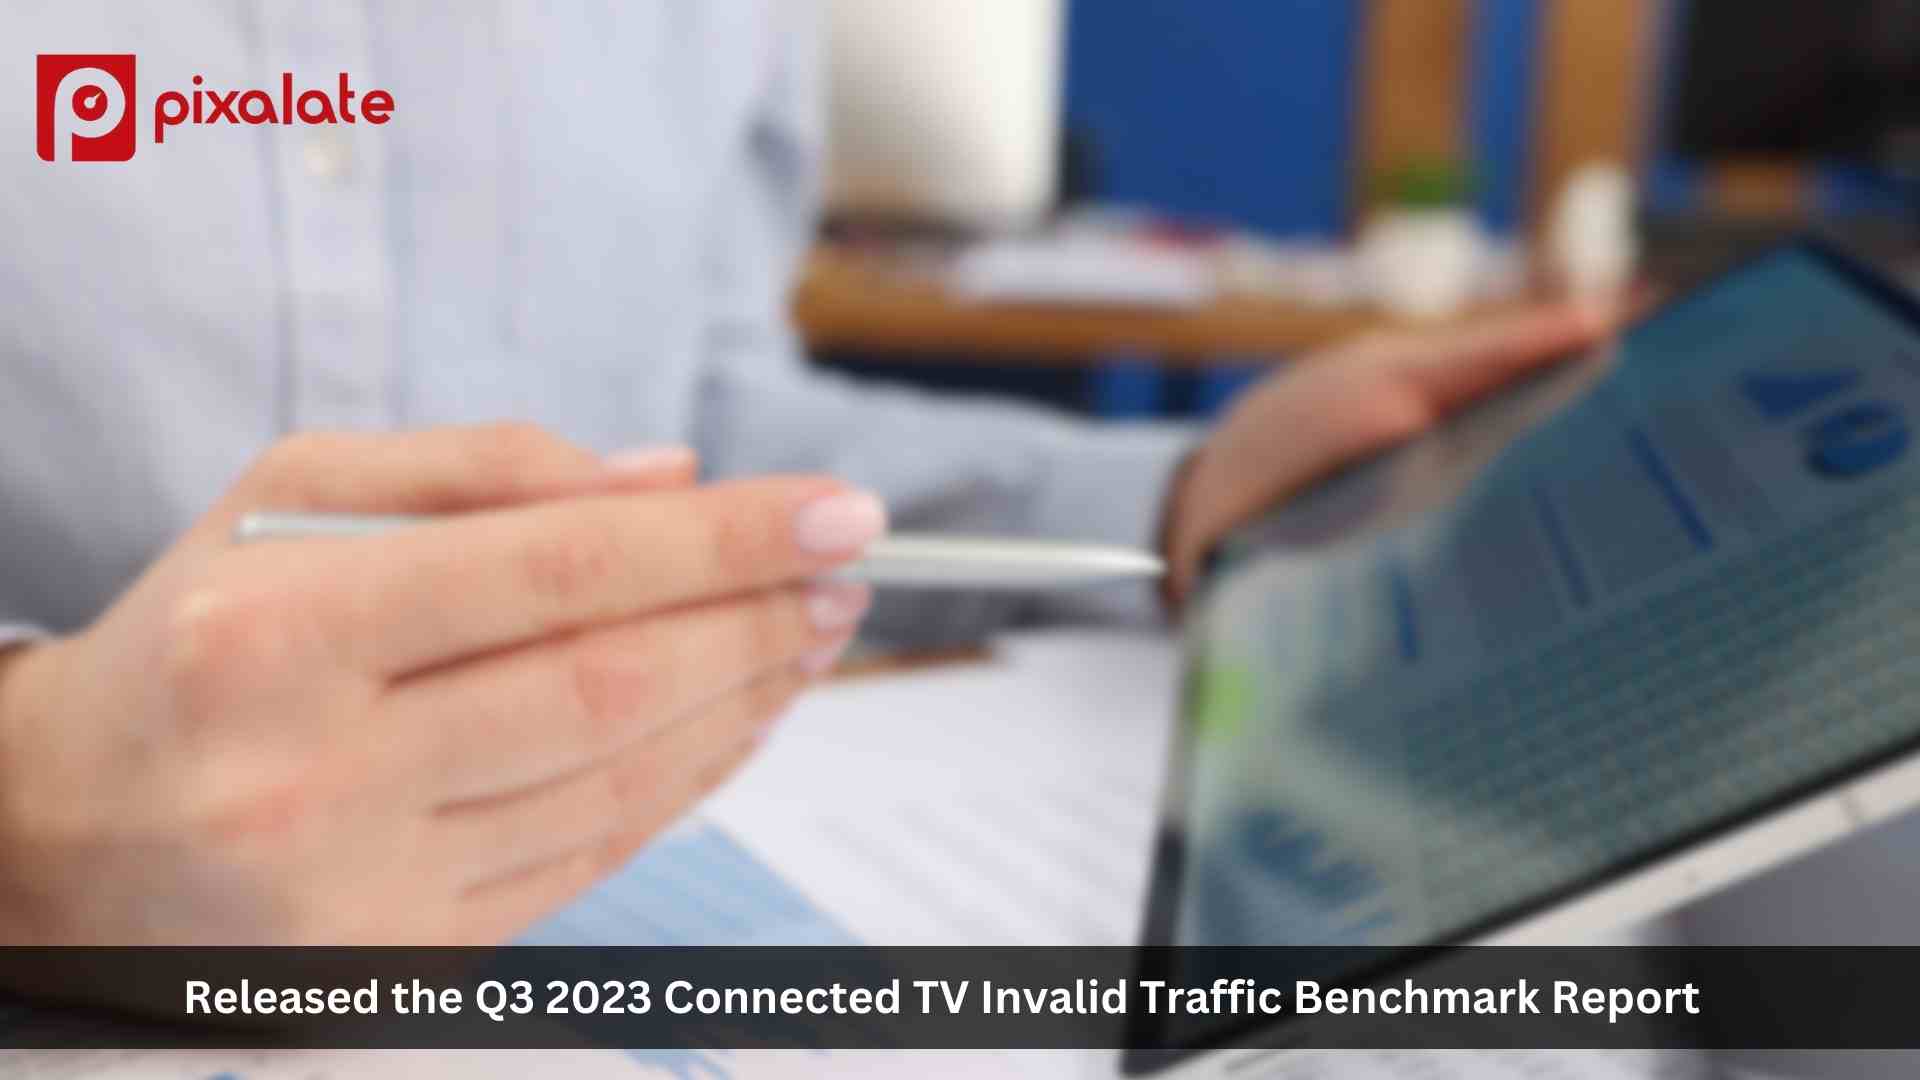 Pixalate Releases Q3 2023 Global Ad Fraud Benchmarks for Connected TV: 16% Global Invalid Traffic (IVT) Rate on CTV Devices Including Roku, Amazon Fire TV, Apple TV, Samsung Smart TV